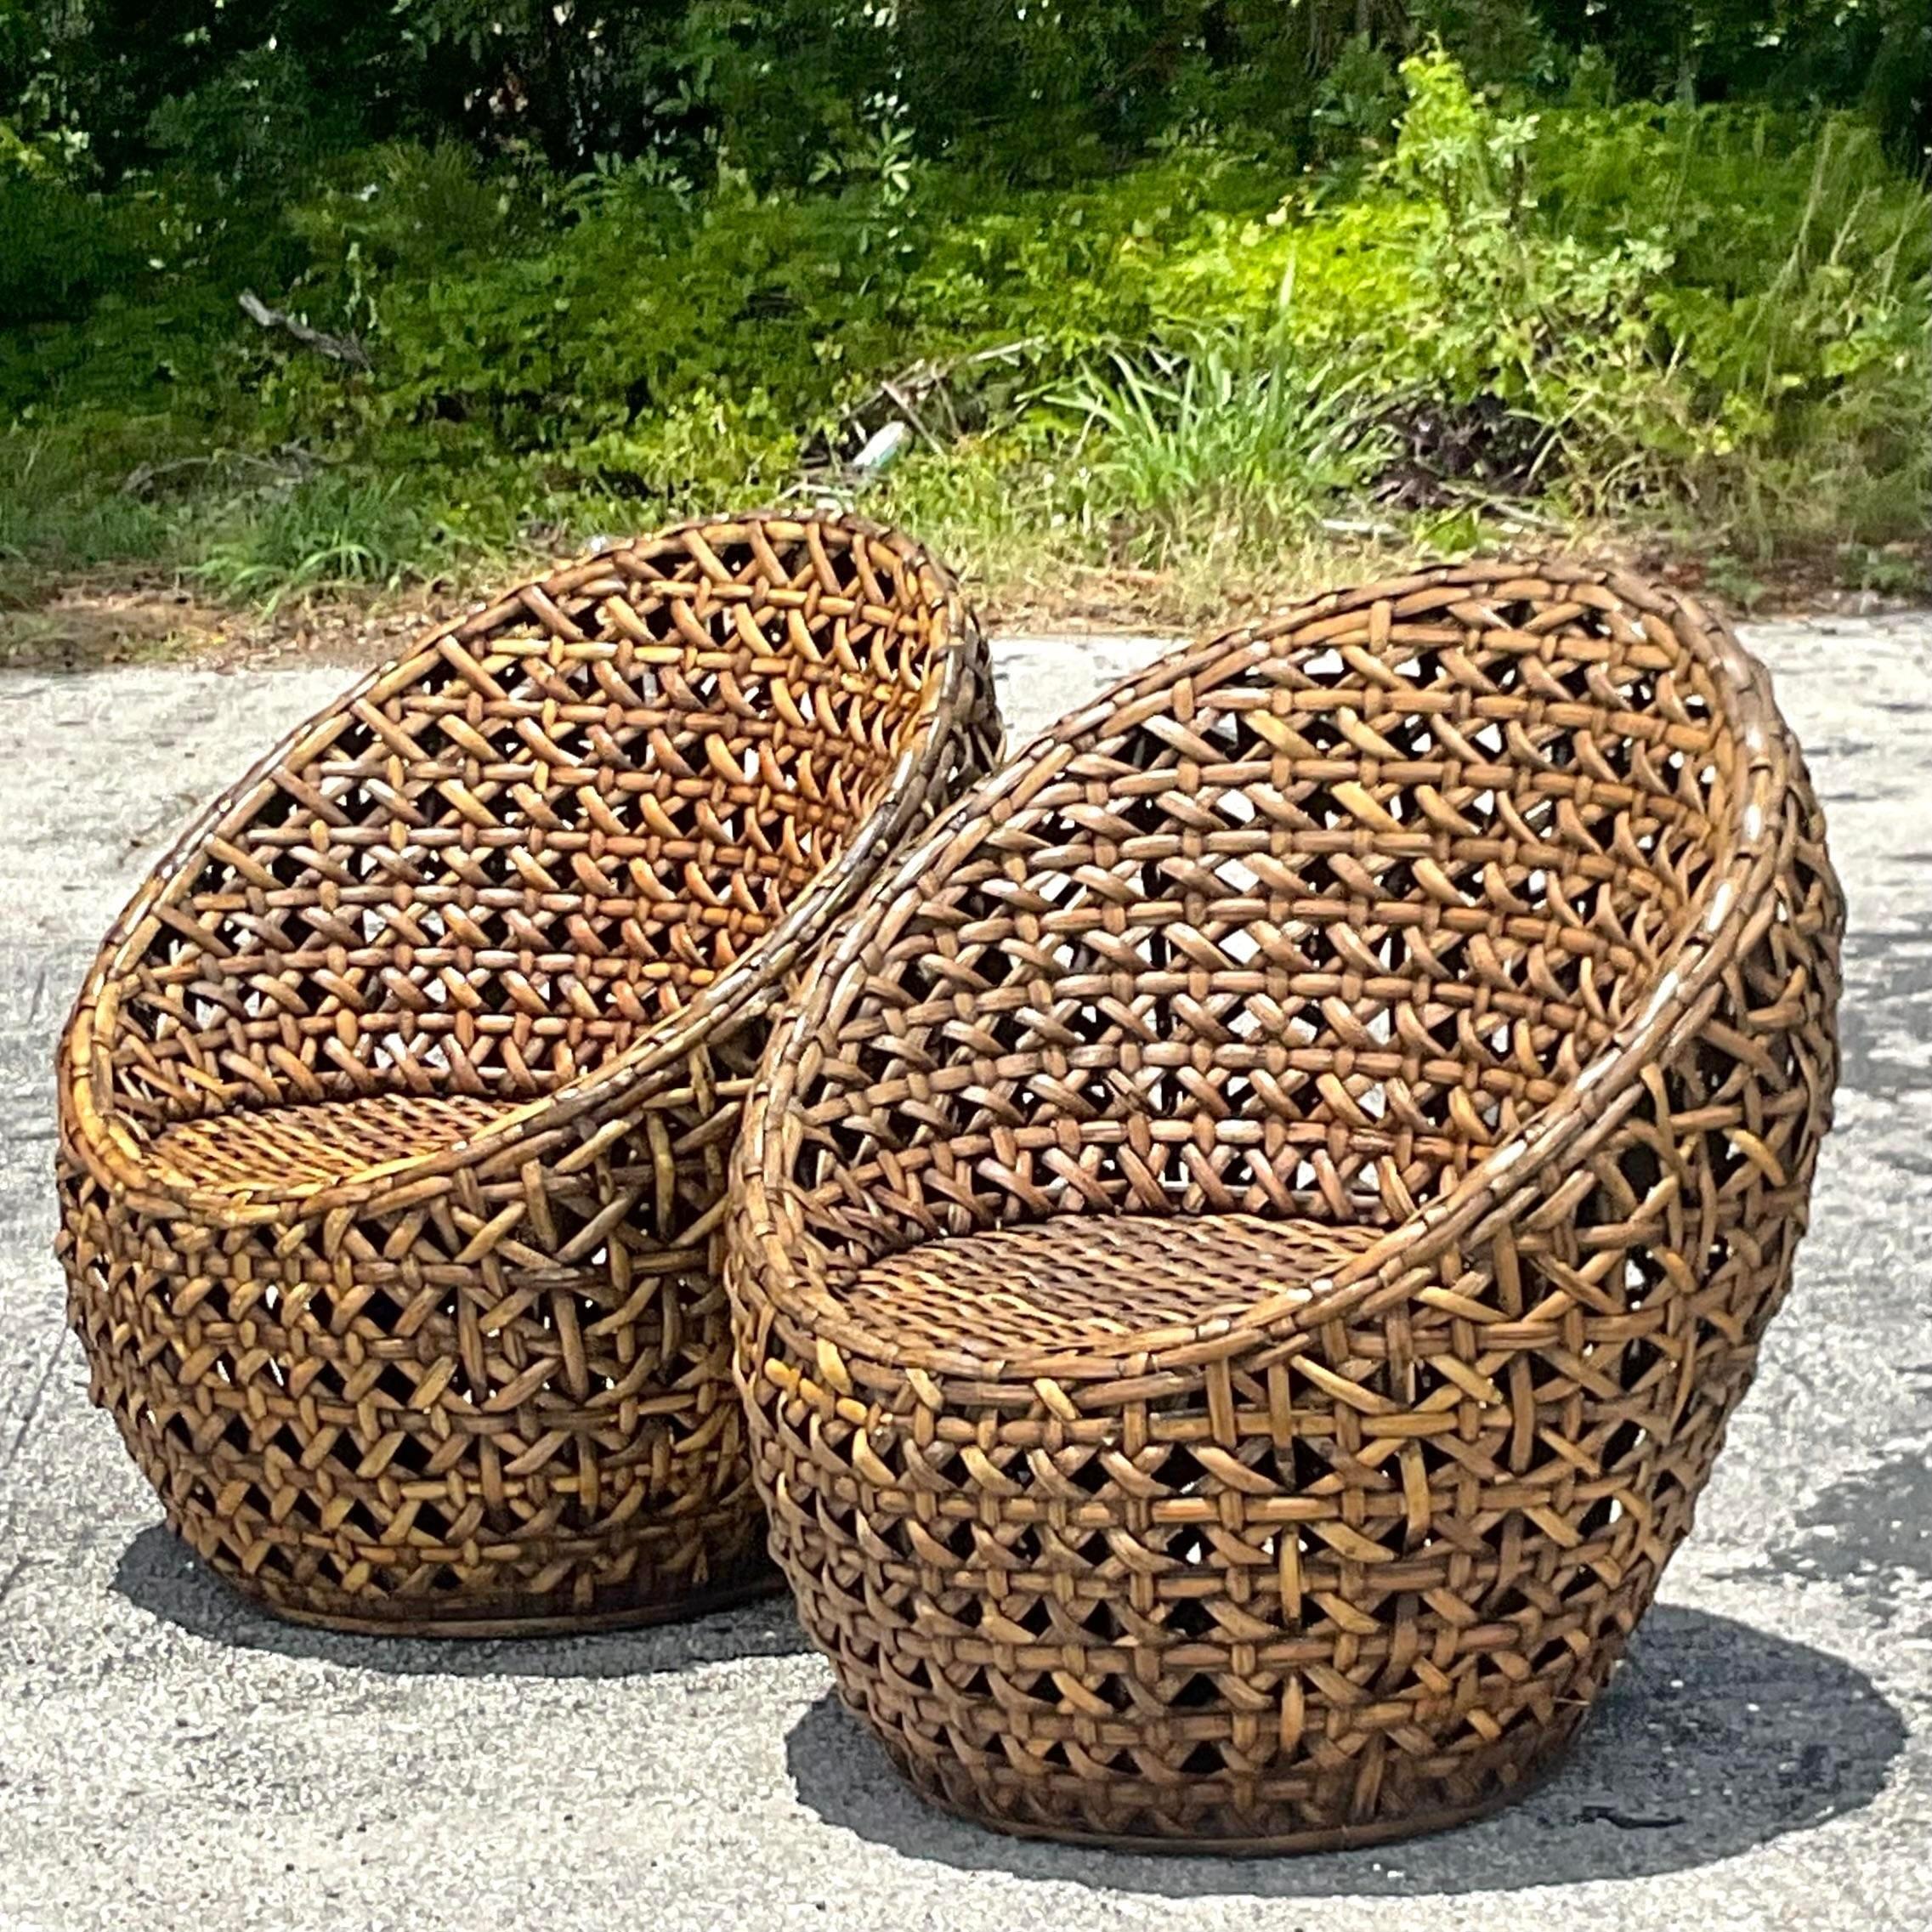 A fabulous pair of vintage Coastal pod chairs. Chic woven rattan in a rich coffee brown color. Acquired from a Palm Beach estate.